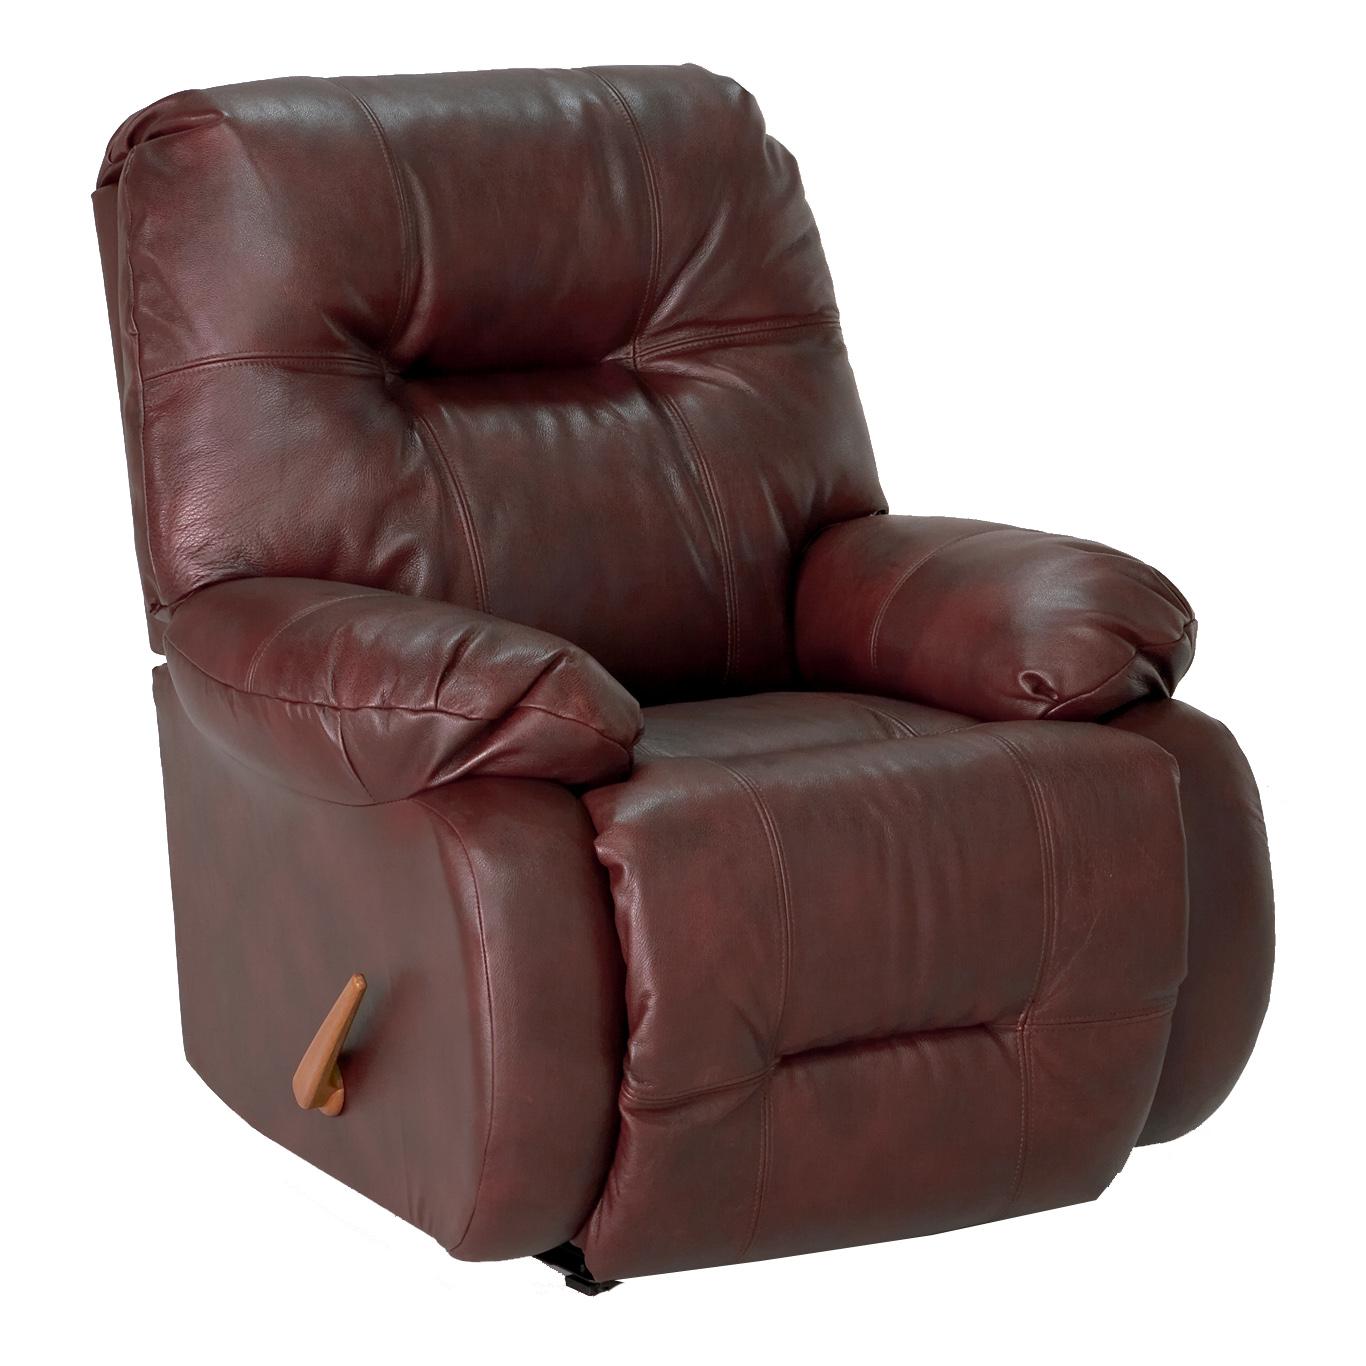 Power Swivel Glider Reclining Chair with Power Tilt Headrest and USB Charging Port